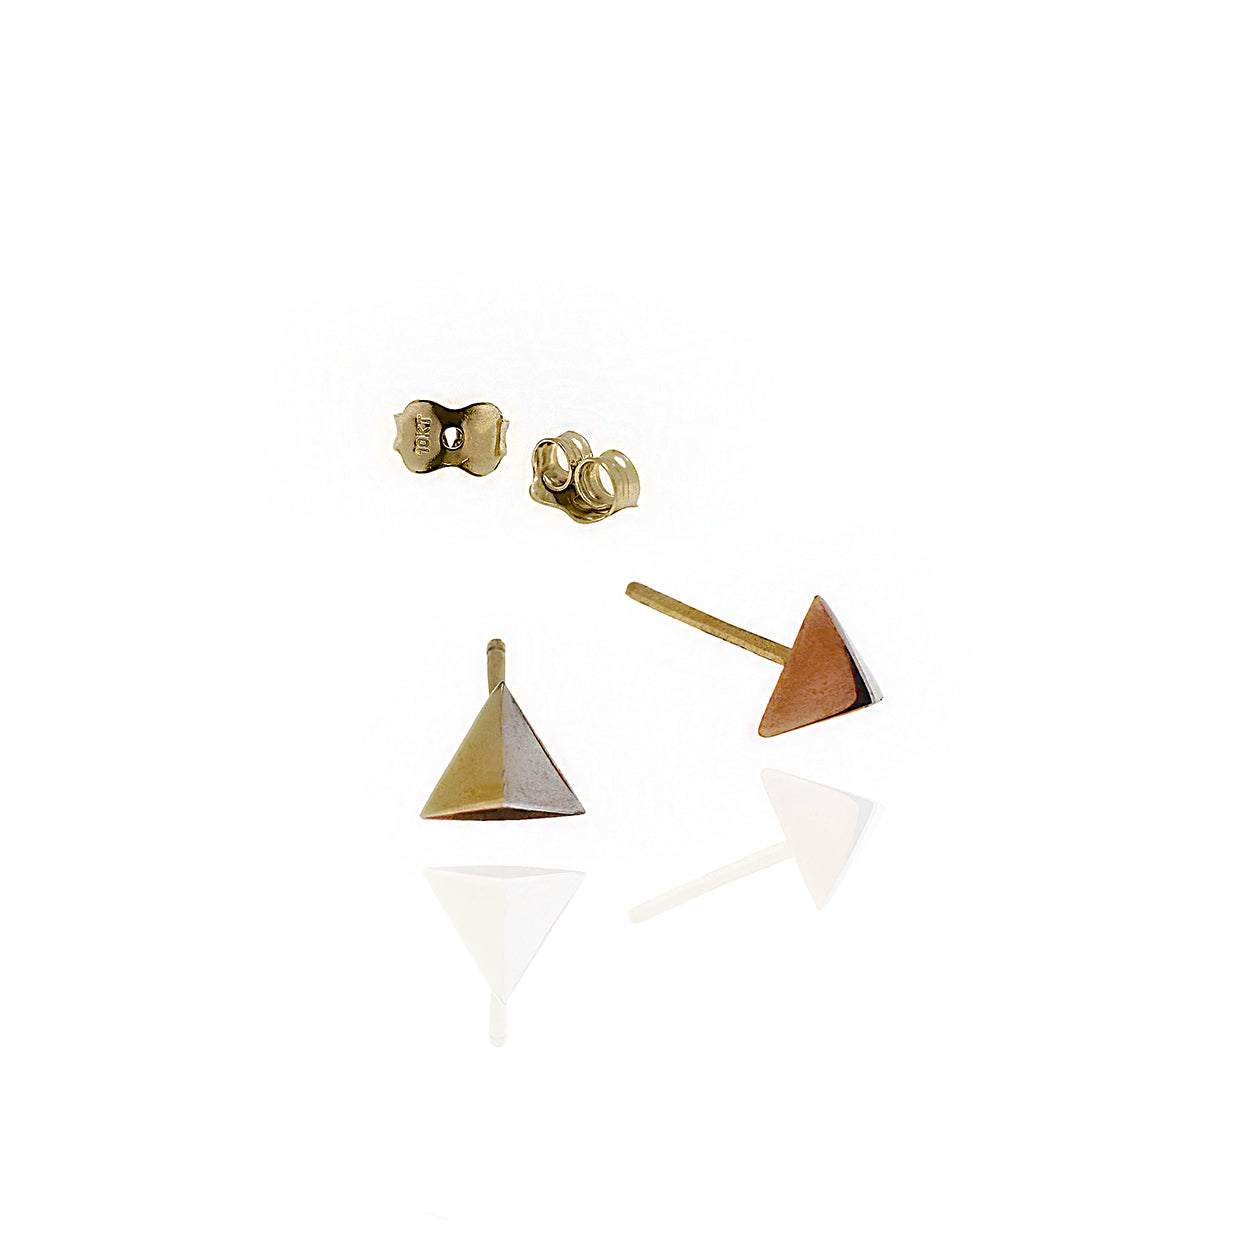 10kt Tri-tone Yellow White and Rose Gold Prism shaped Stud Earrings and Butterflies